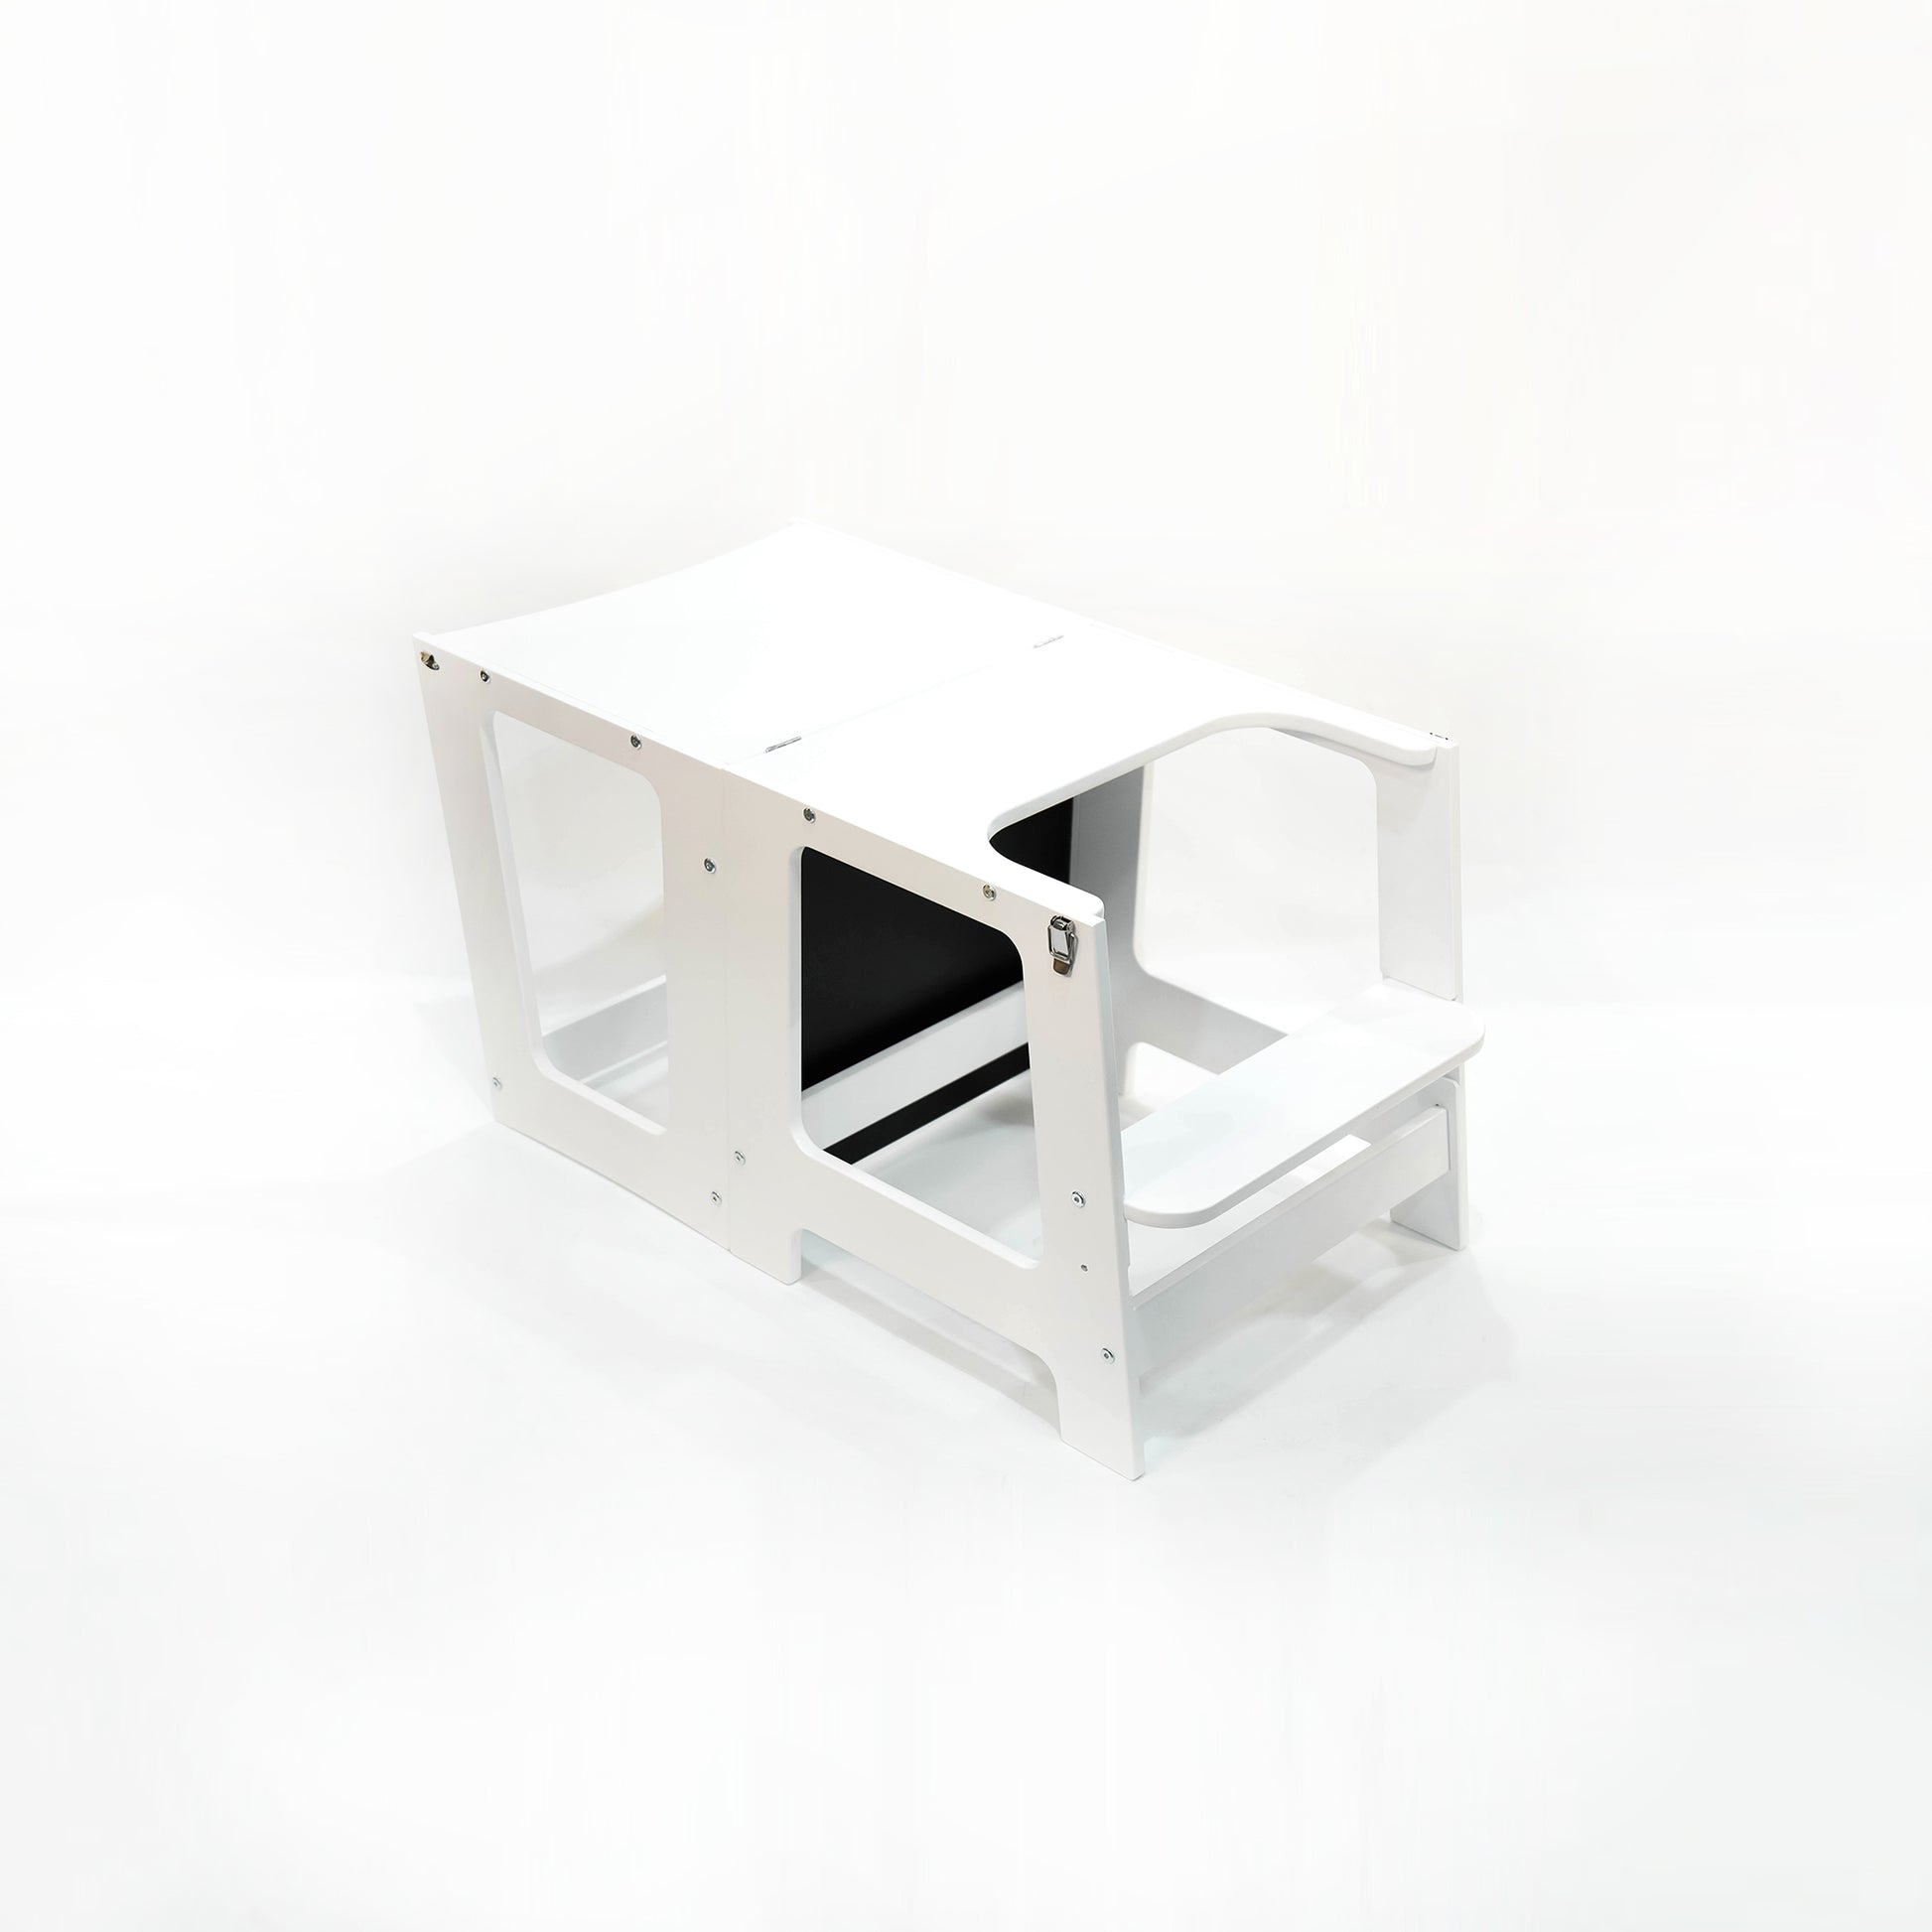 Angled view of the White Convertible Learning Tower in its table position, ready for children's activities